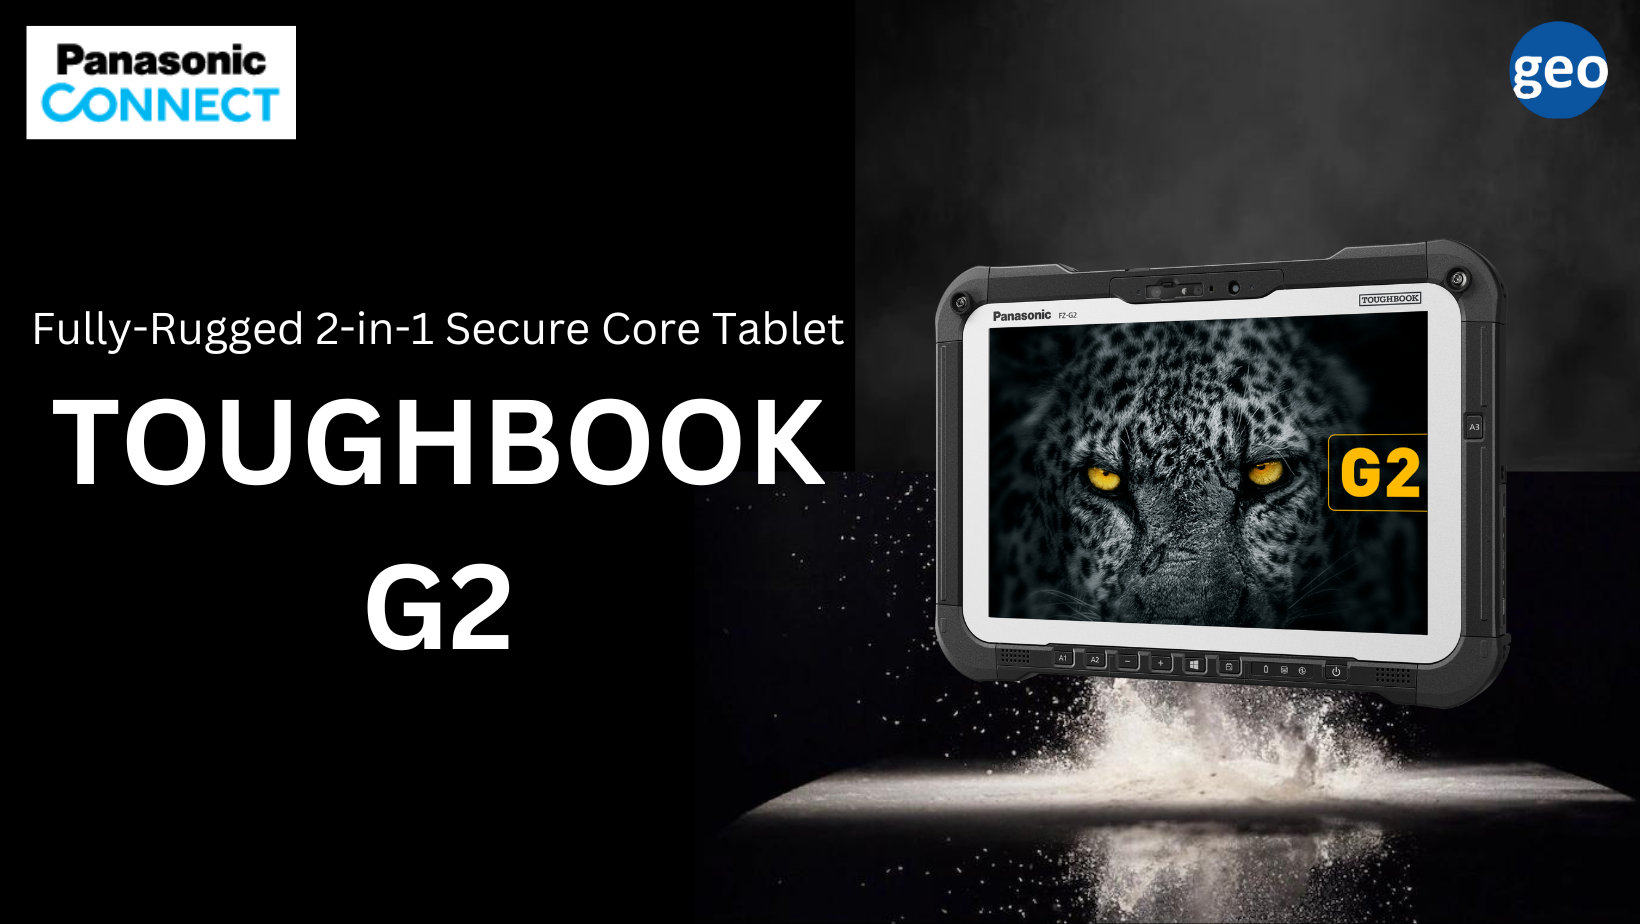 Panasonic: TOUGHBOOK G2 is a Rugged yet Versatile Device for a Wide Range of Challenging Work Environments